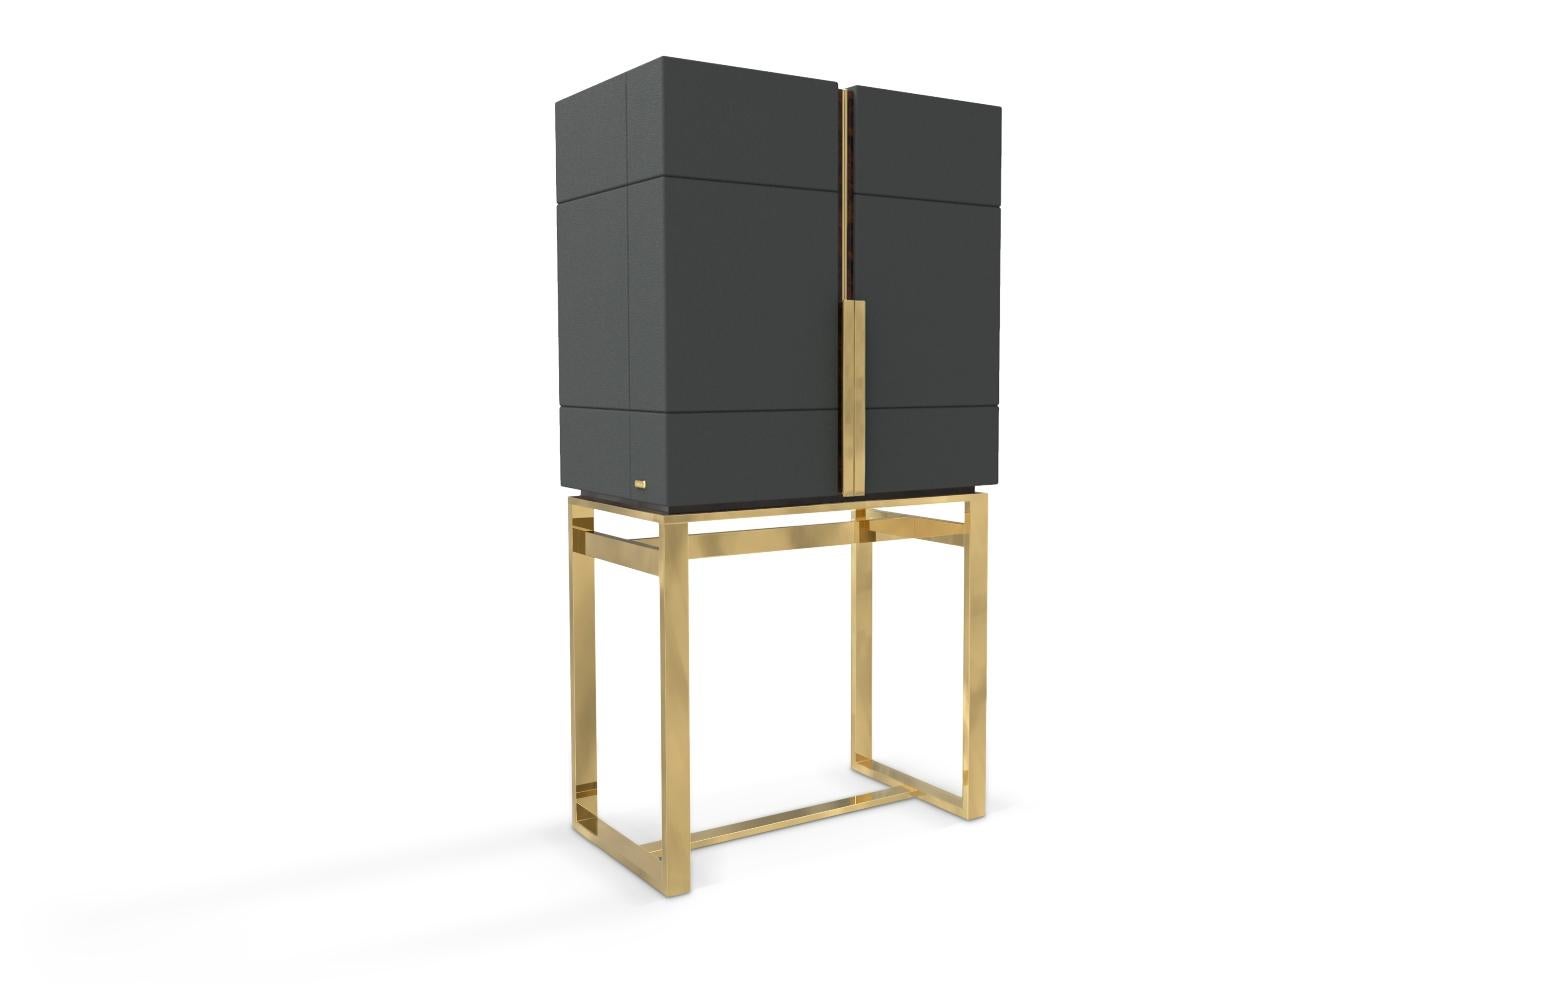 With geometric lines and elegant shape, the Lloyd bar cabinet provides not only a Classic storage option but an accent piece that will become the focal point of your interiors. Made with quality materials such as gold-plated brass, this piece will